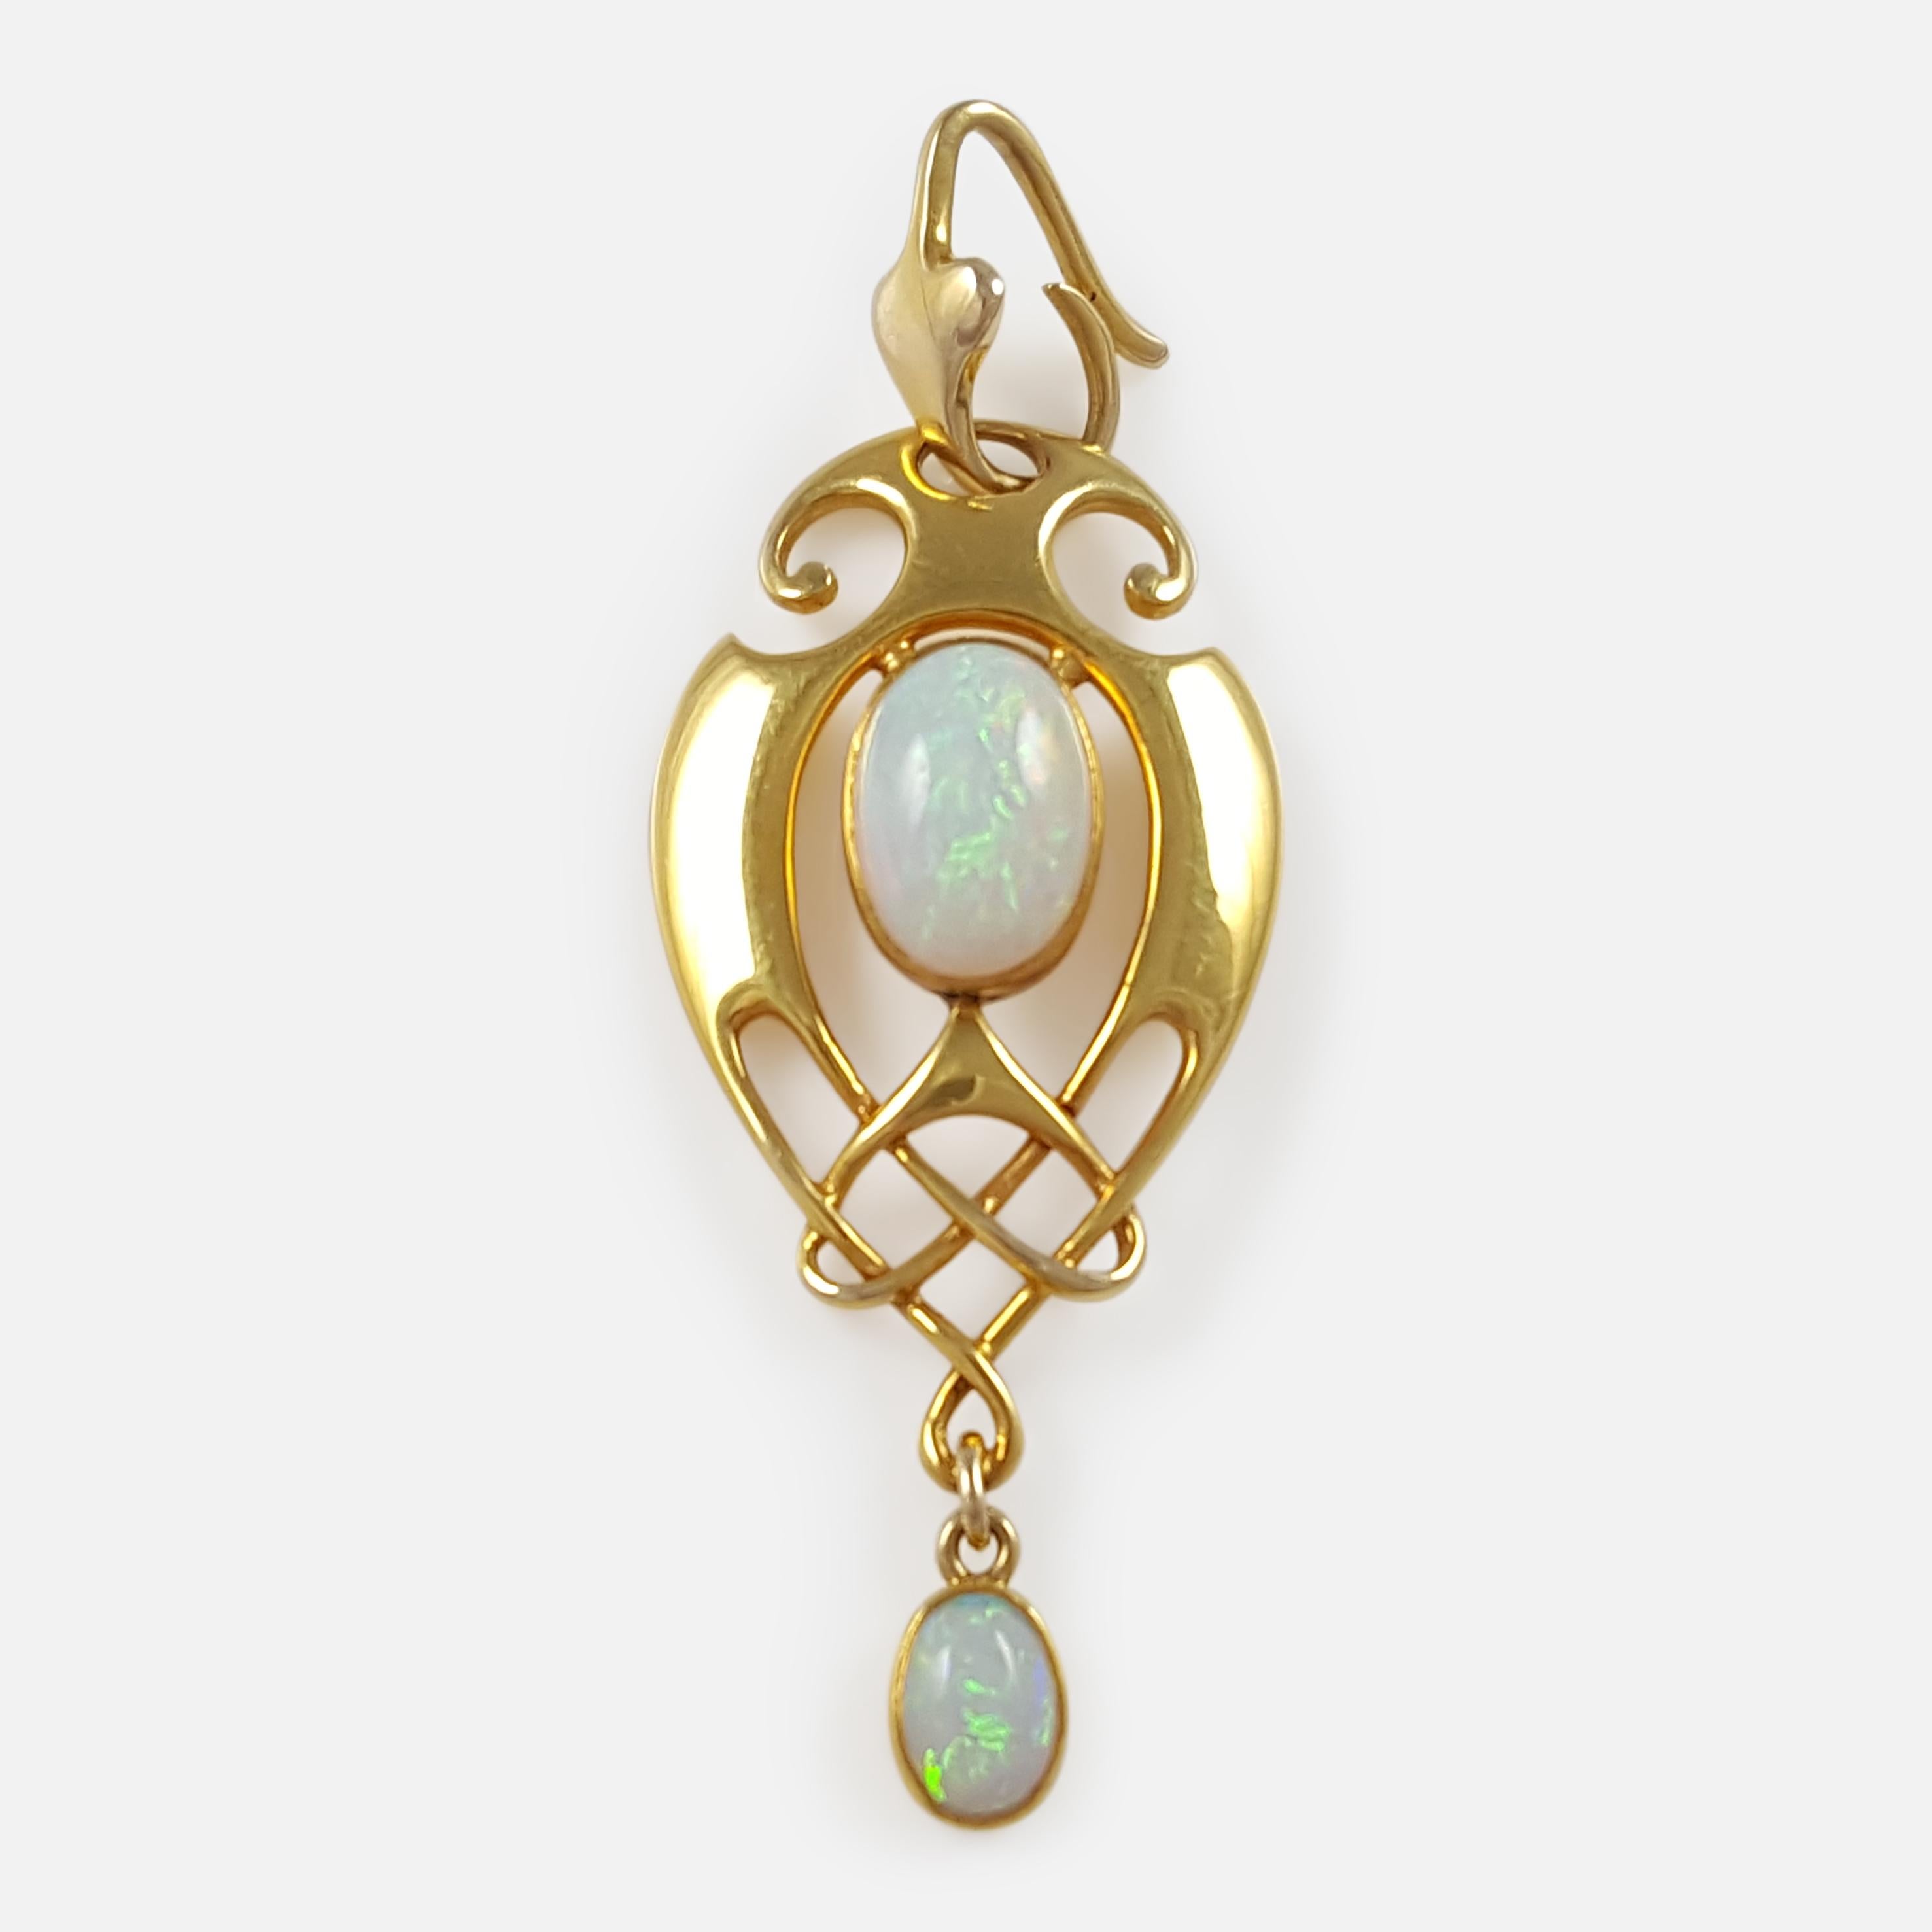 This is a fine antique Art Nouveau Murrle Bennett & Co Celtic Revival 15ct yellow gold & opal cabochon pendant, circa 1905. The pendant is designed in the Celtic revival style. The two opal cabochons are in good condition. The pendant is stamped to